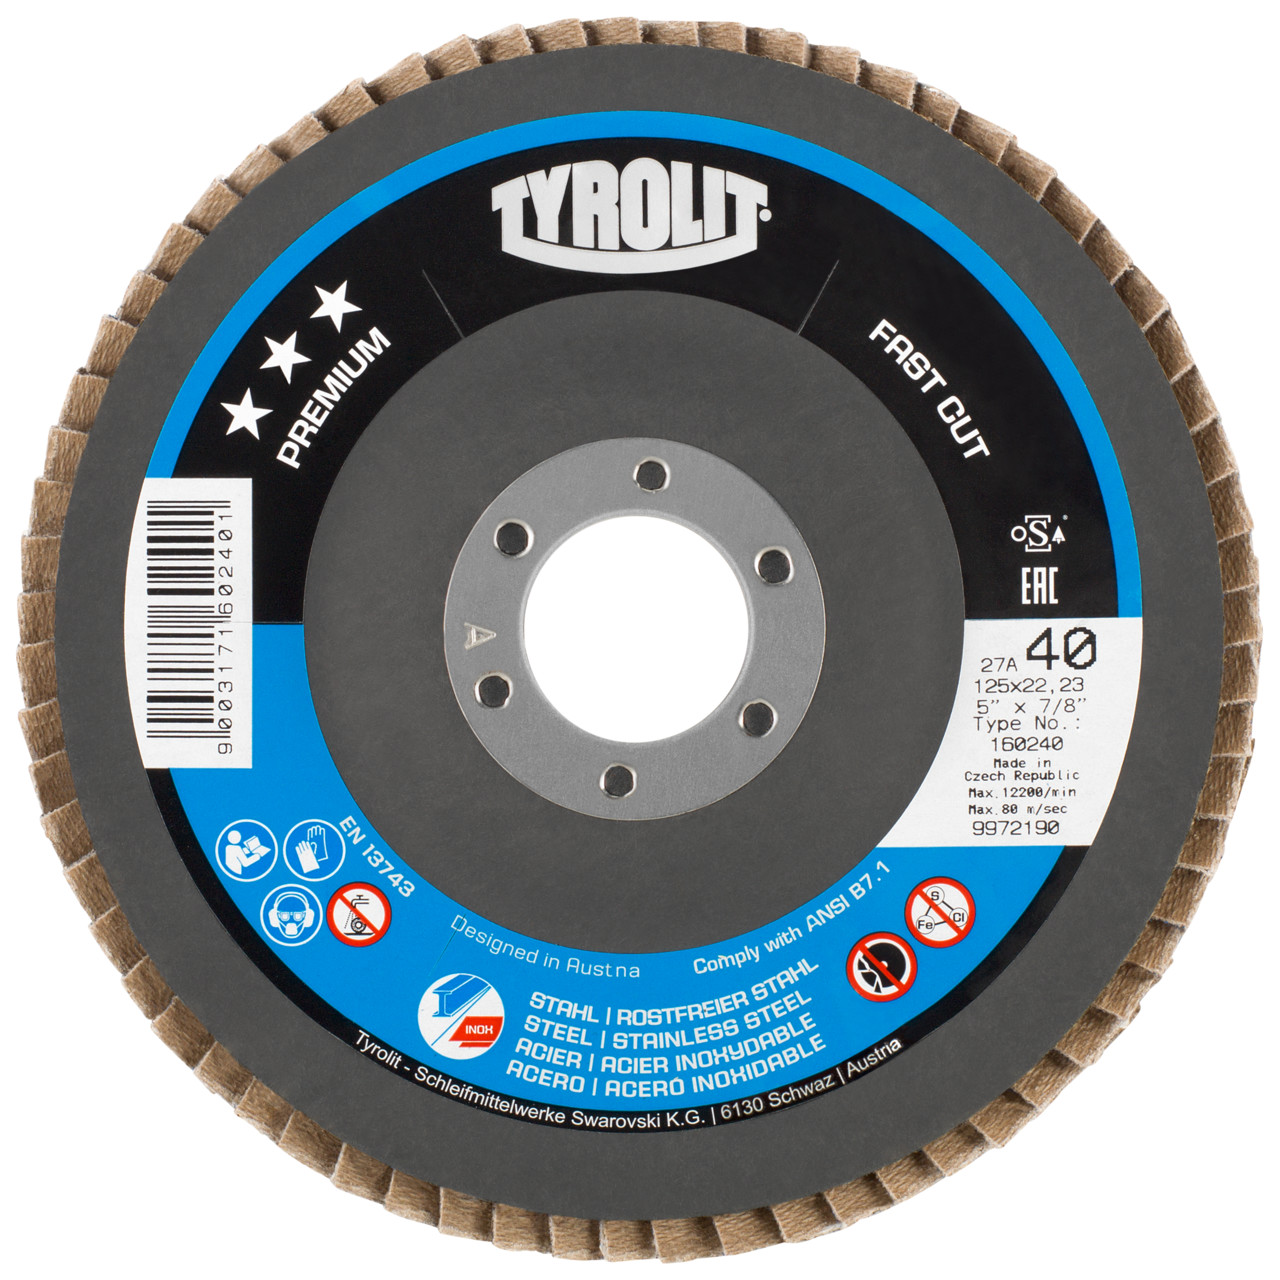 Tyrolit Serrated lock washer DxH 115x22.2 FASTCUT for steel &amp; stainless steel, P40, shape: 28A - straight version (glass fibre carrier body version), Art. 160249